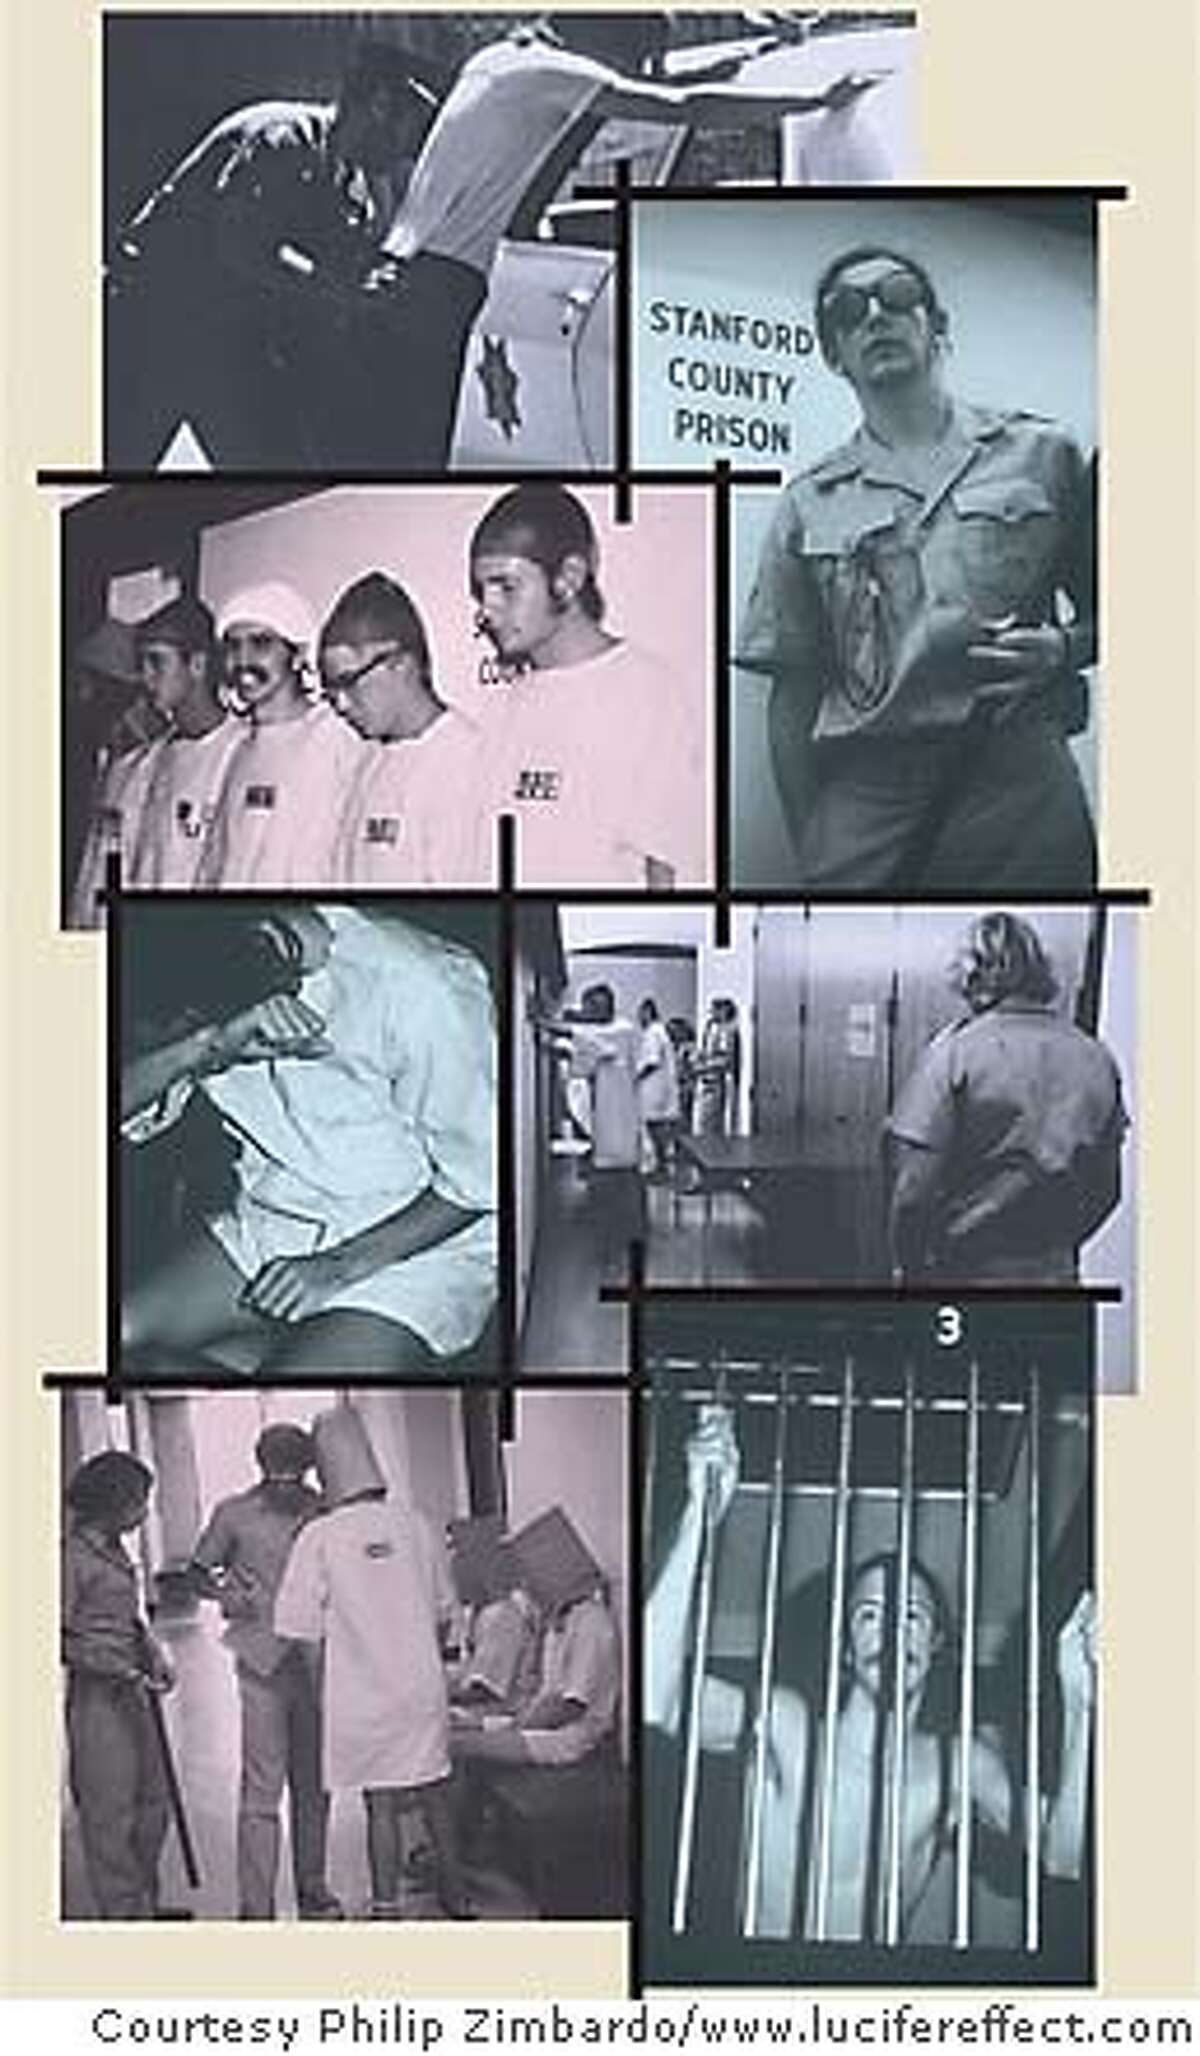 Poisoned By Bad Situations: Professor behind Stanford Prison Experiment says being in a cruel place can make you act evil. Photos courtesy Philip Zimbardo, www.lucifereffect.com